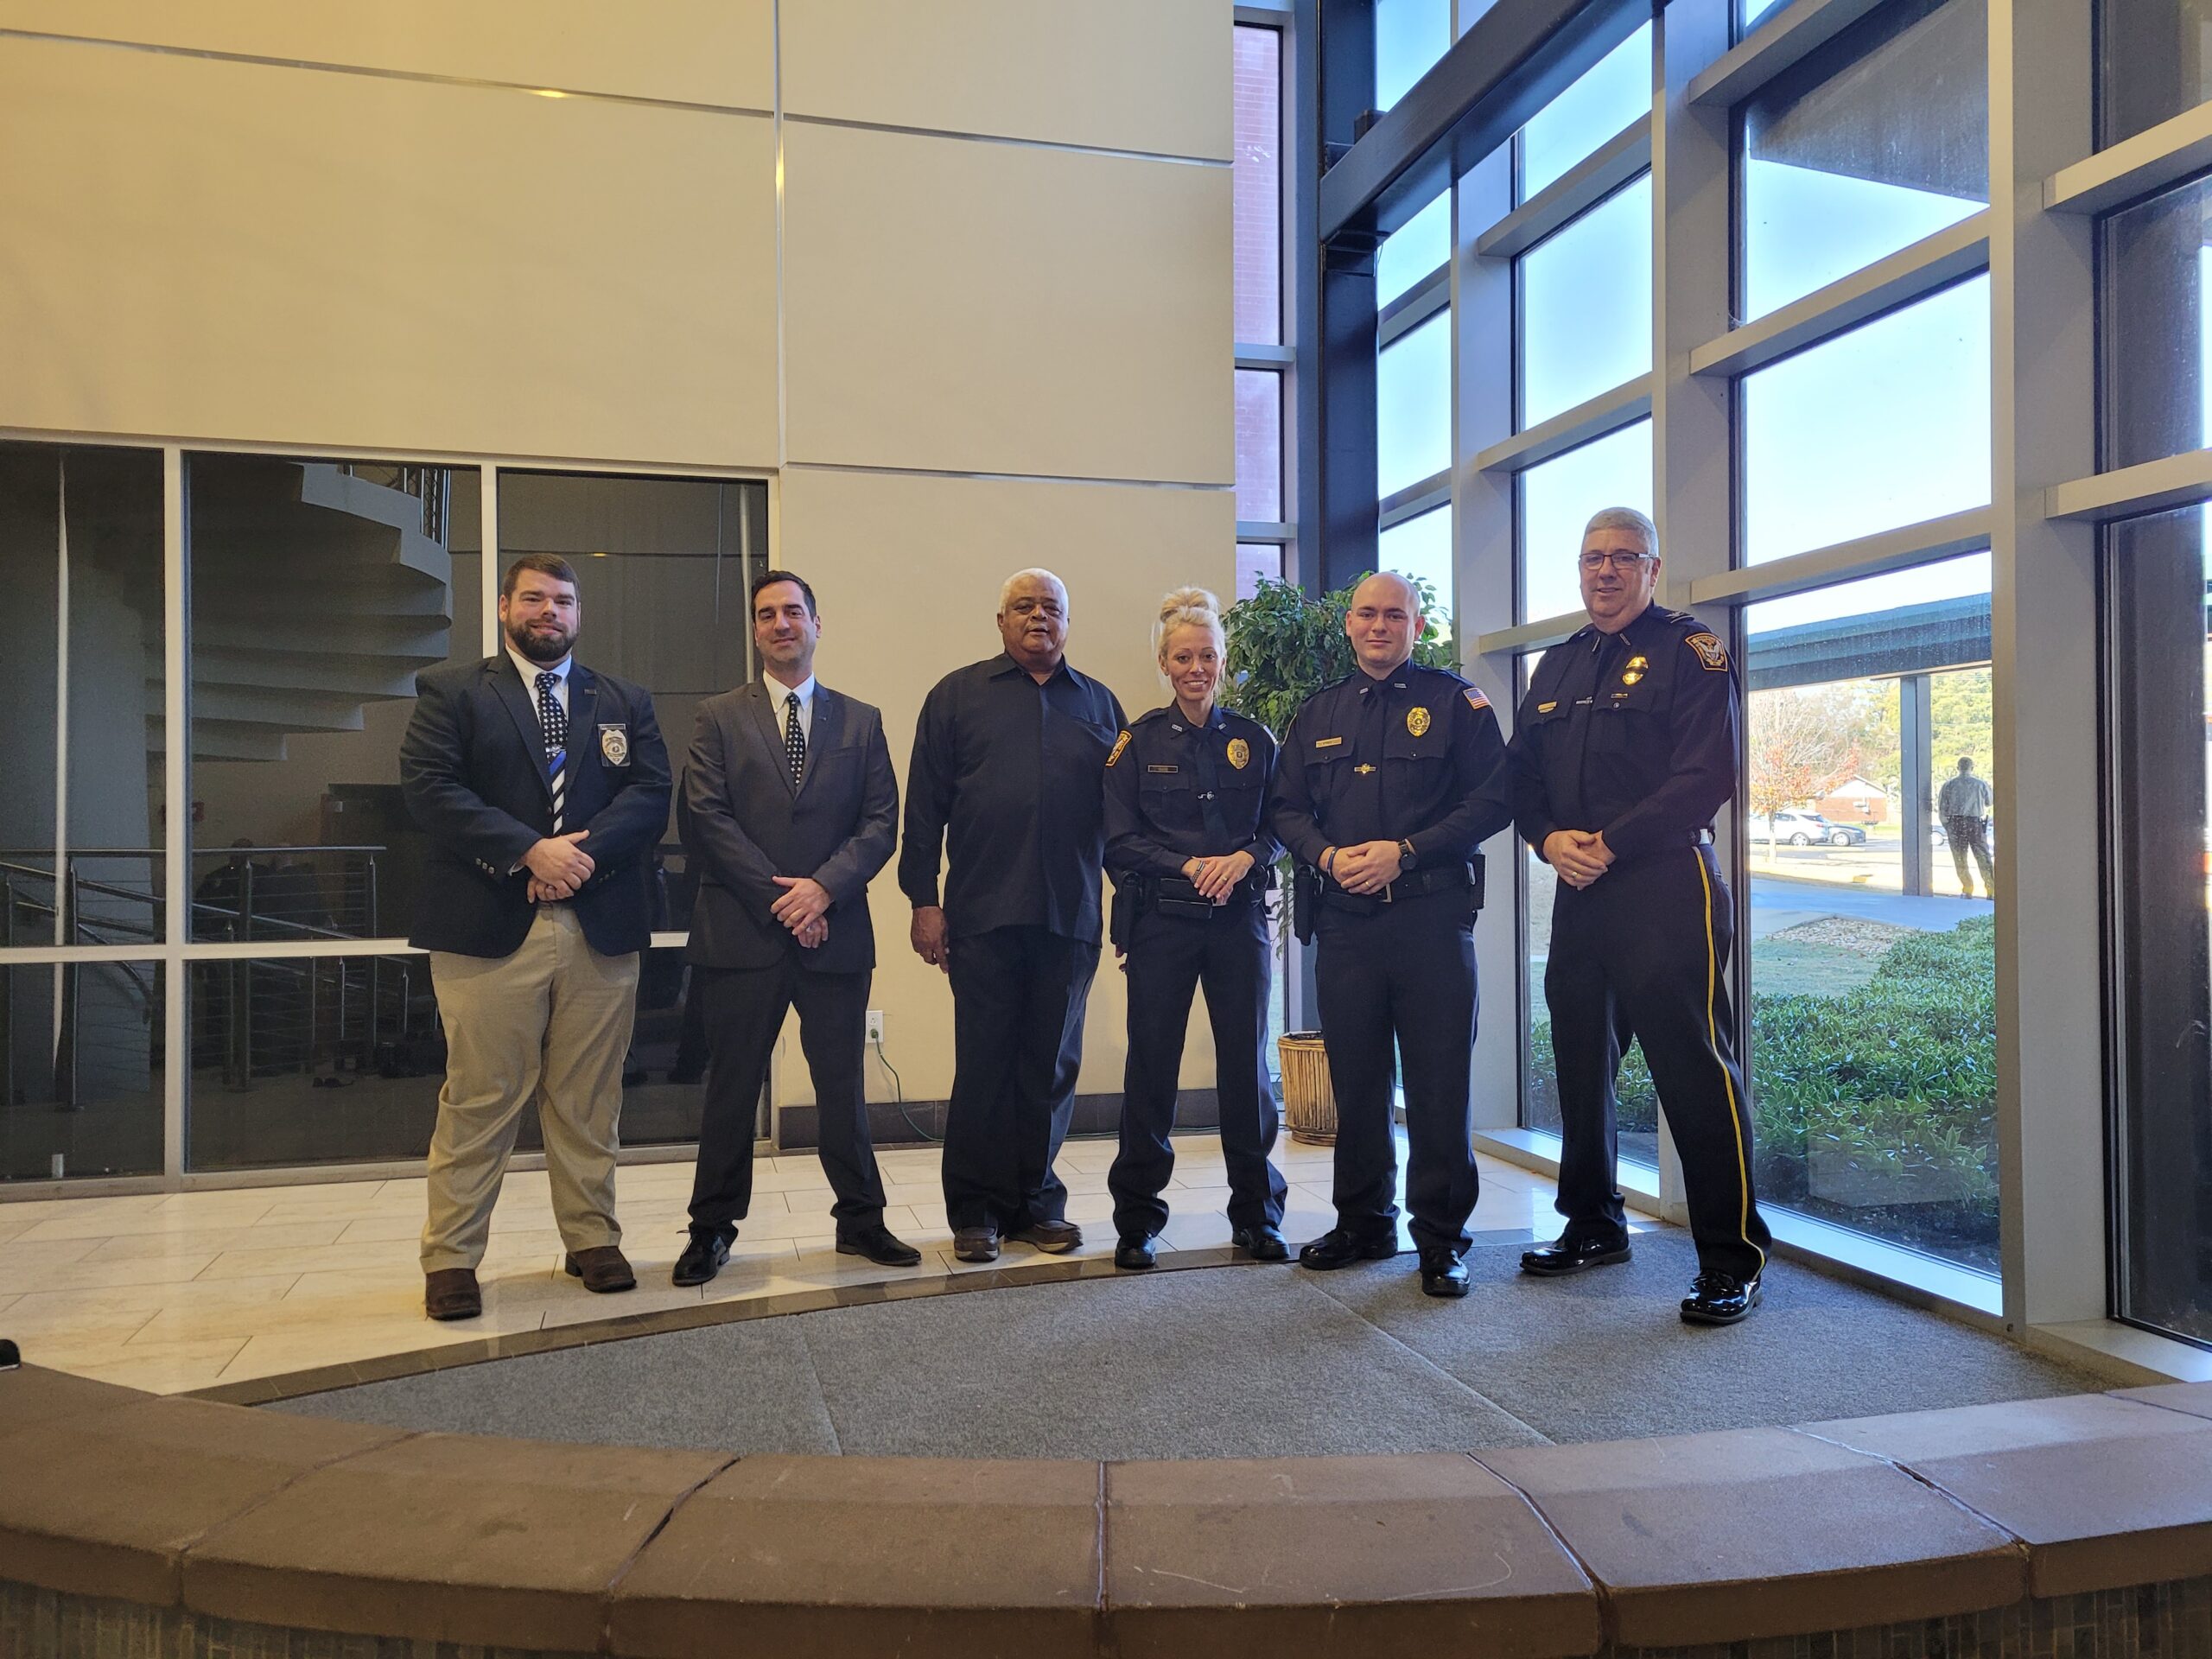 LEFT TO RIGHT
LT CHANCE HUNT, SGT PETER GOLDEN, MAYOR FRANK GOODMAN, OFFICER JESSICA MACE, OFFICER JORY WHALEY, CHIEF JONATHAN FLOYD